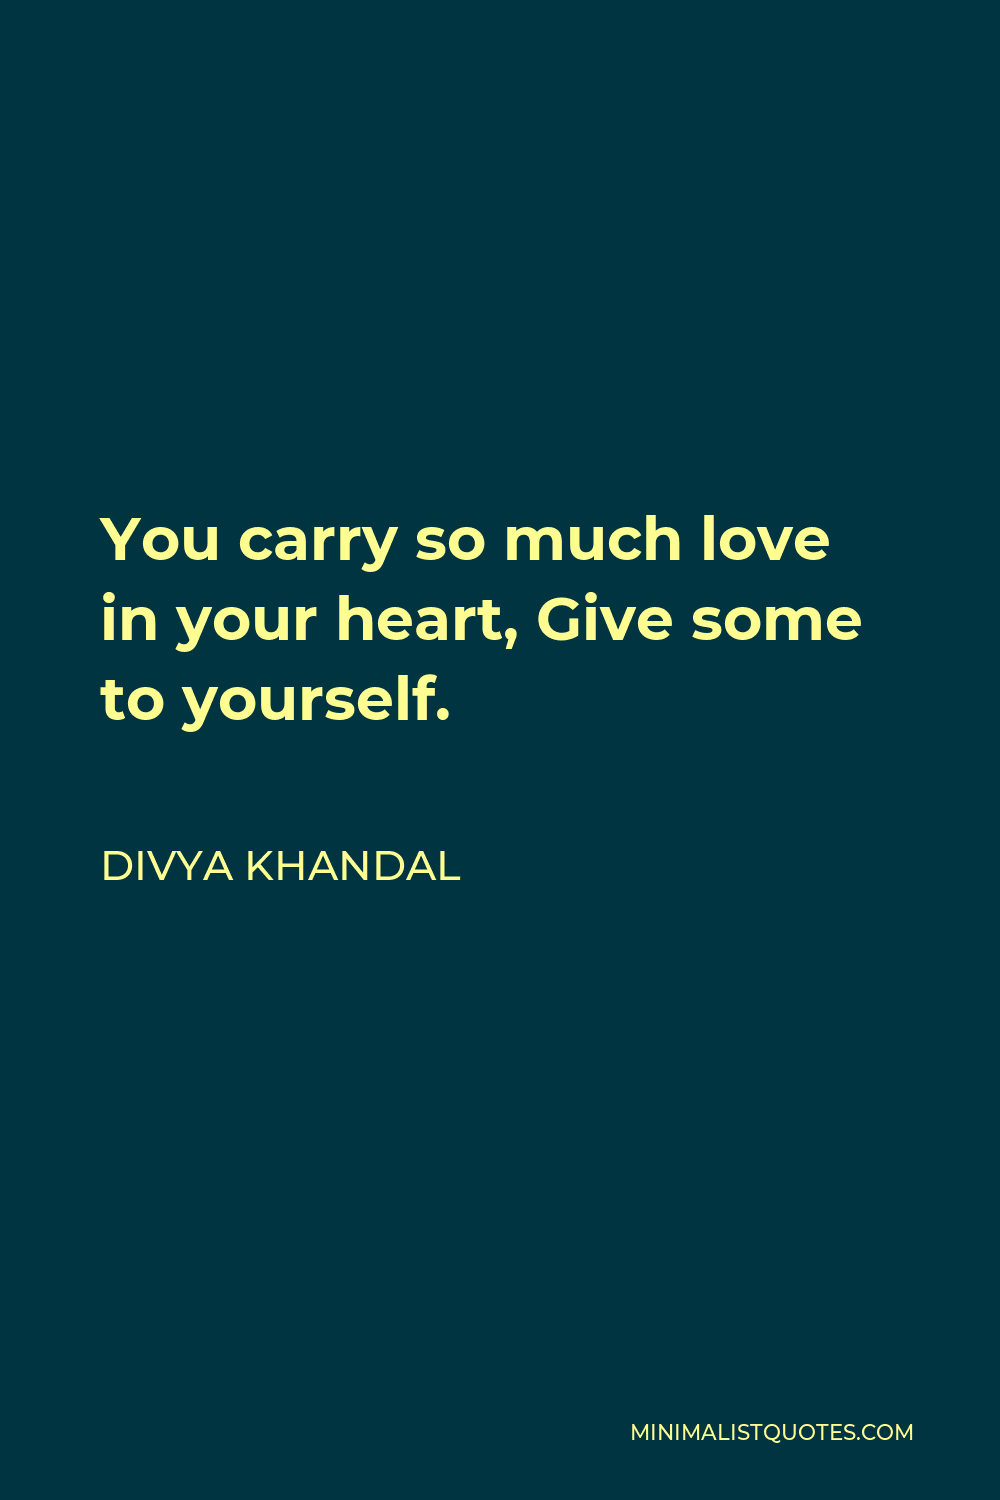 Divya khandal Quote - You carry so much love in your heart, Give some to yourself.